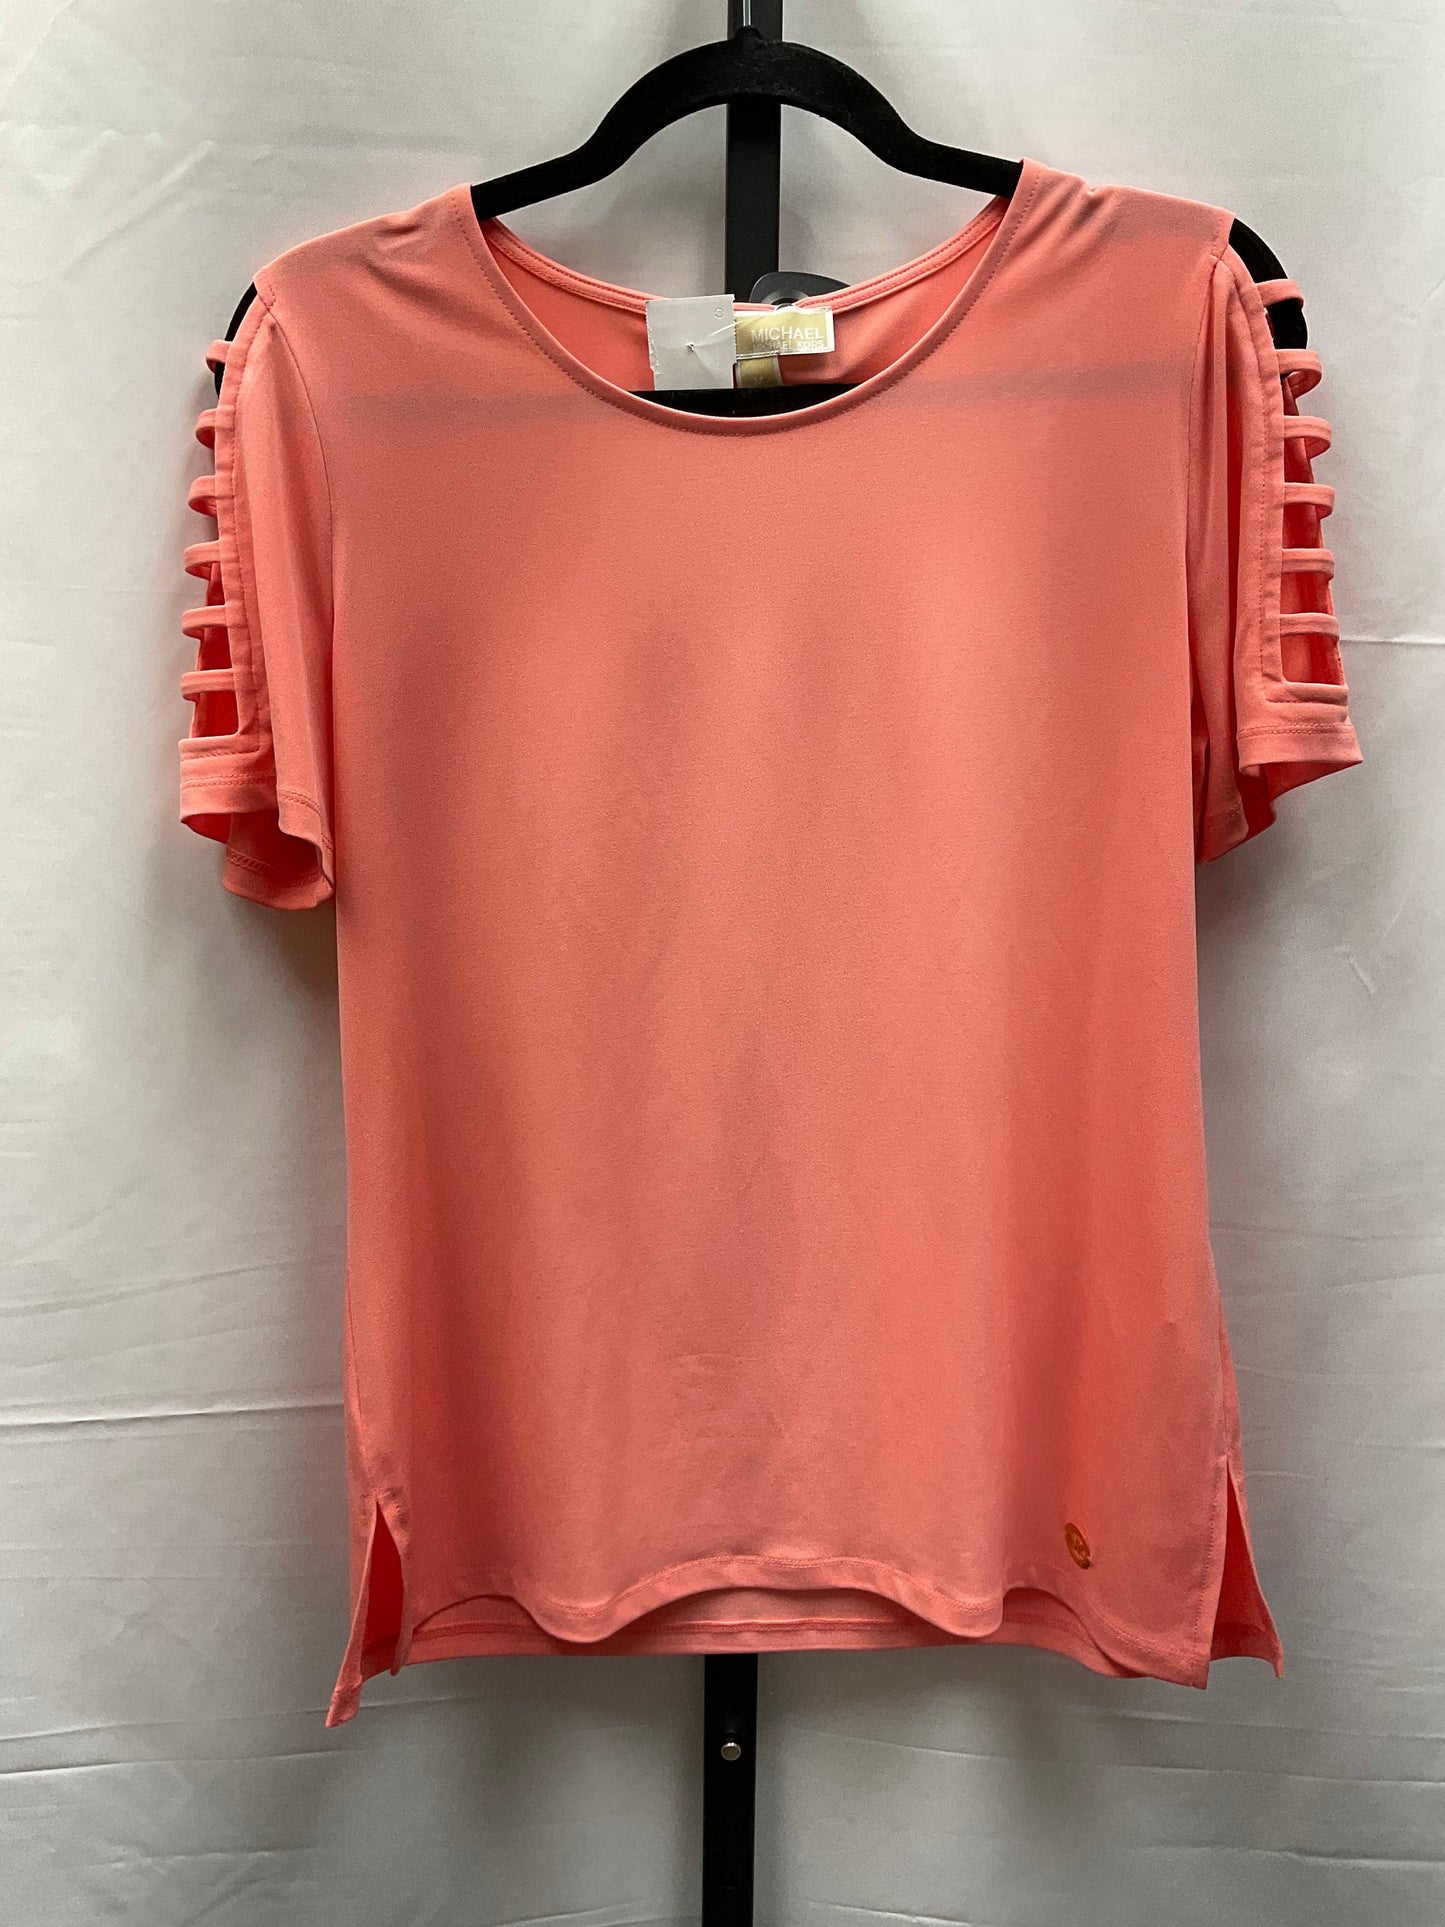 Coral Top Short Sleeve Michael By Michael Kors, Size M